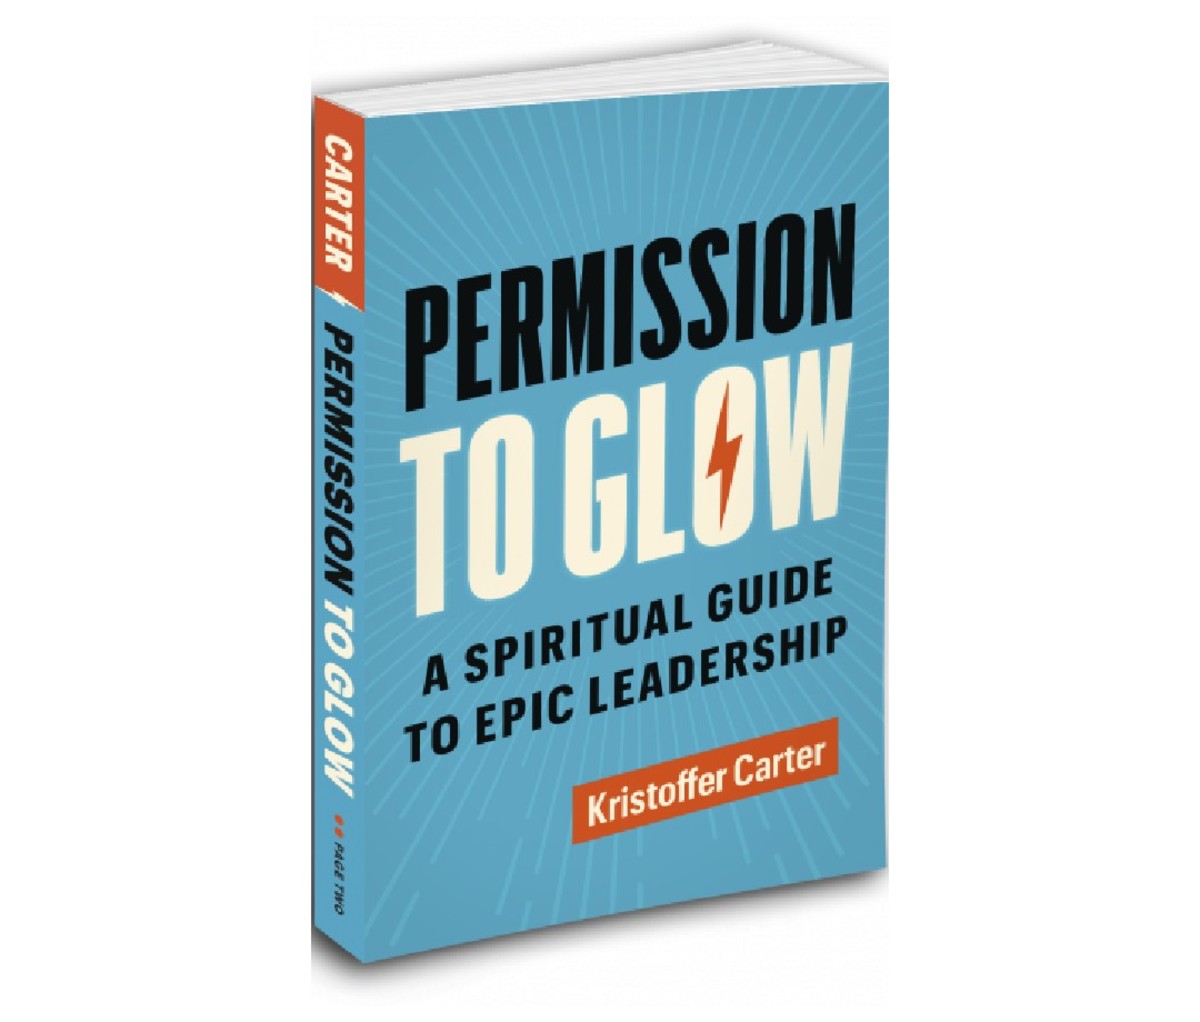 Permission to Glow: A Spiritual Guide to Epic Leadership by Kristoffer Carter